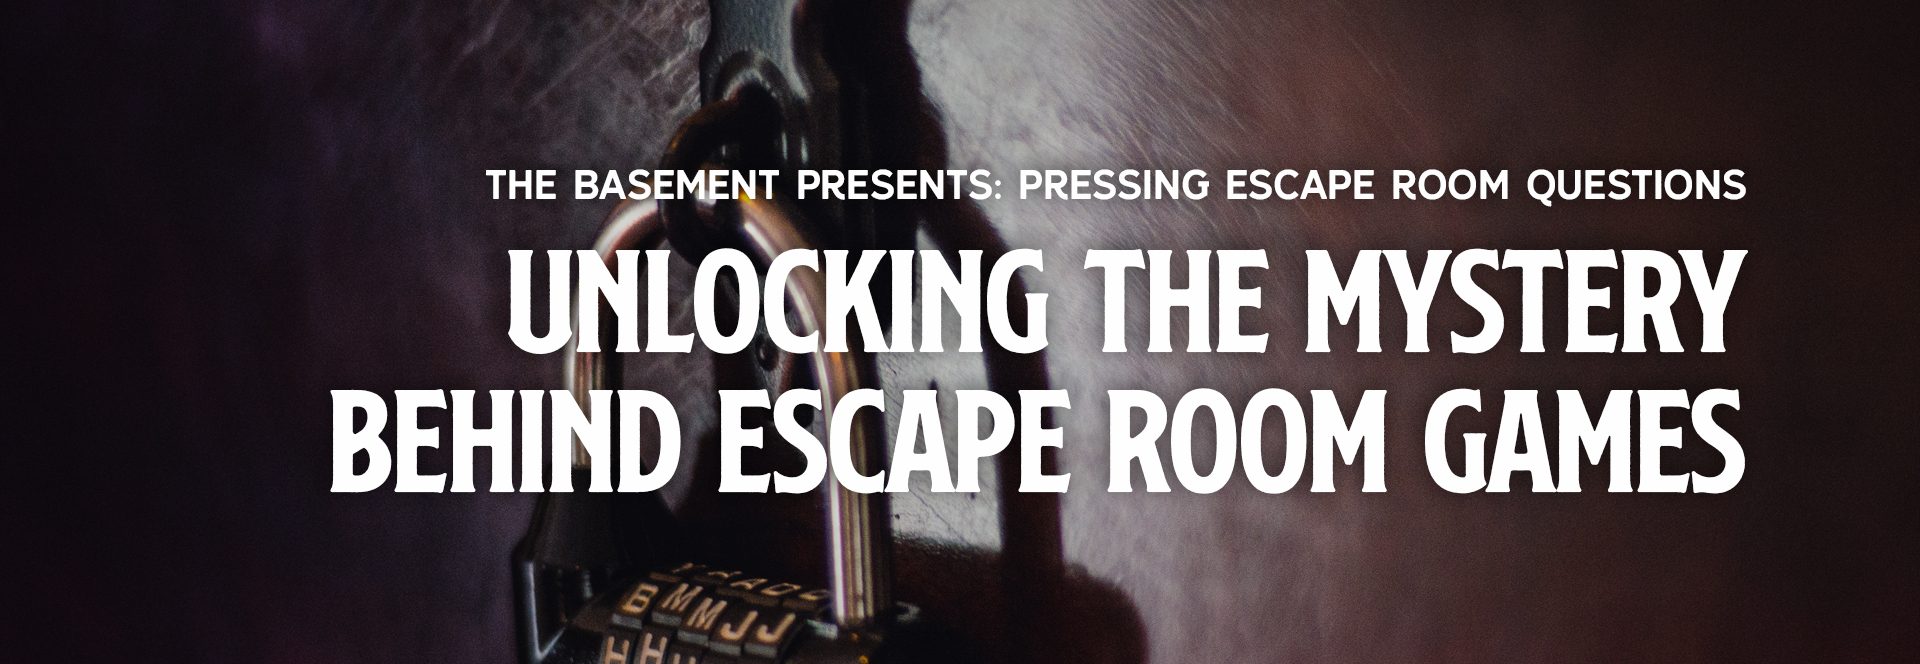 Unlocking the Mystery Behind Escape Room Games